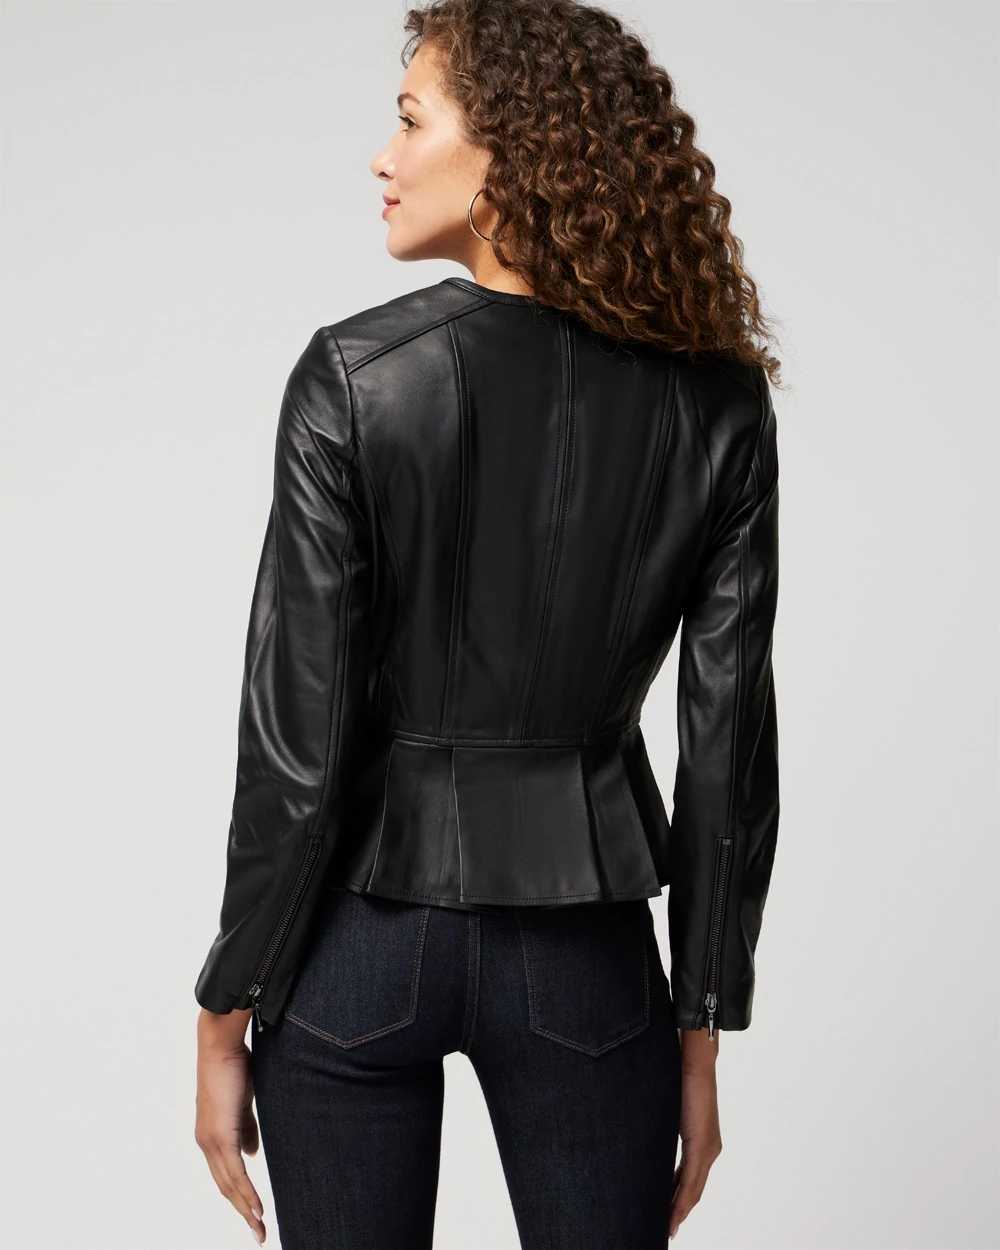 Leather Flirty Jacket click to view larger image.